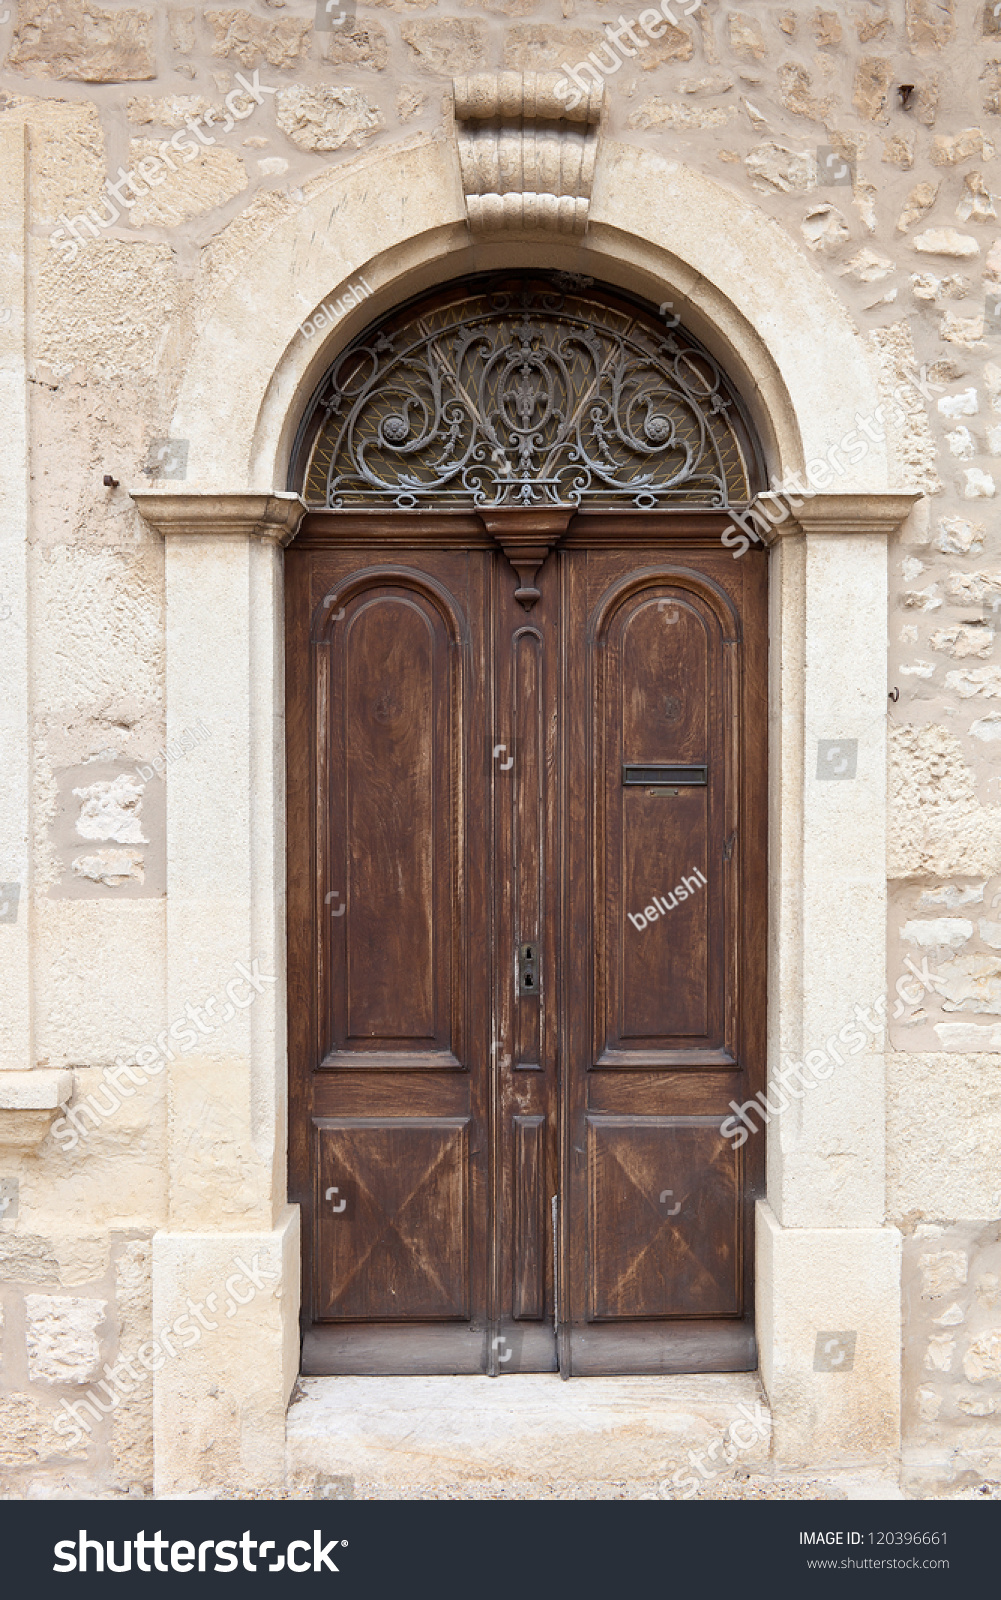 Brown Aged Rounded Door Of A An Old Mansion, France Stock Photo ...